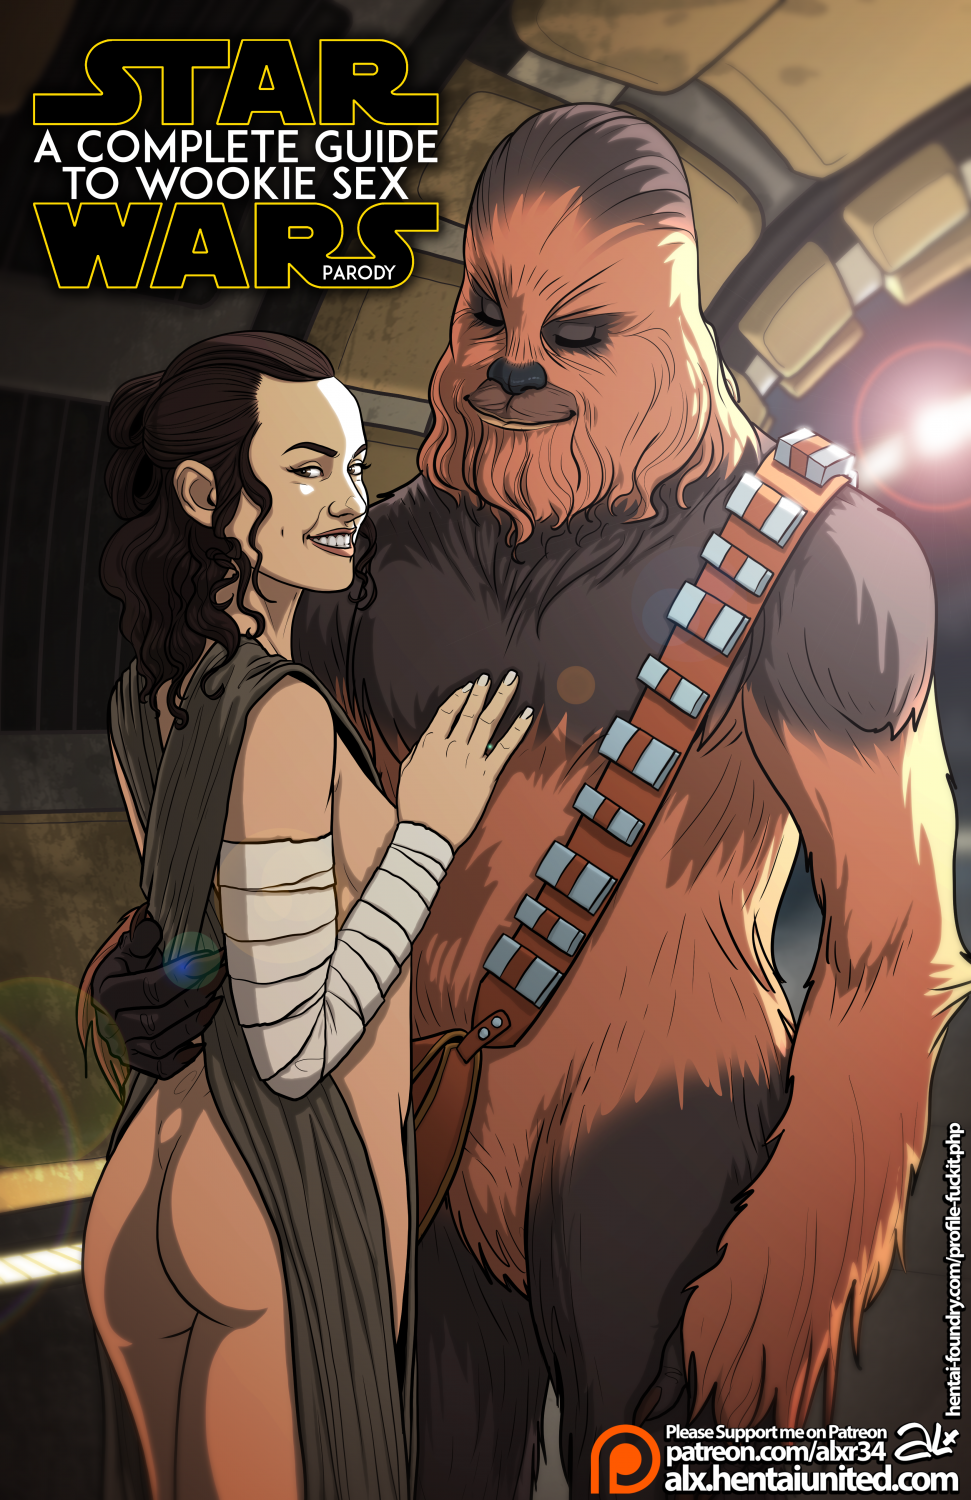 Star Wars: A Complete Guide to Wookie Sex porn comics Oral sex, Aliens, Anal Sex, Masturbation